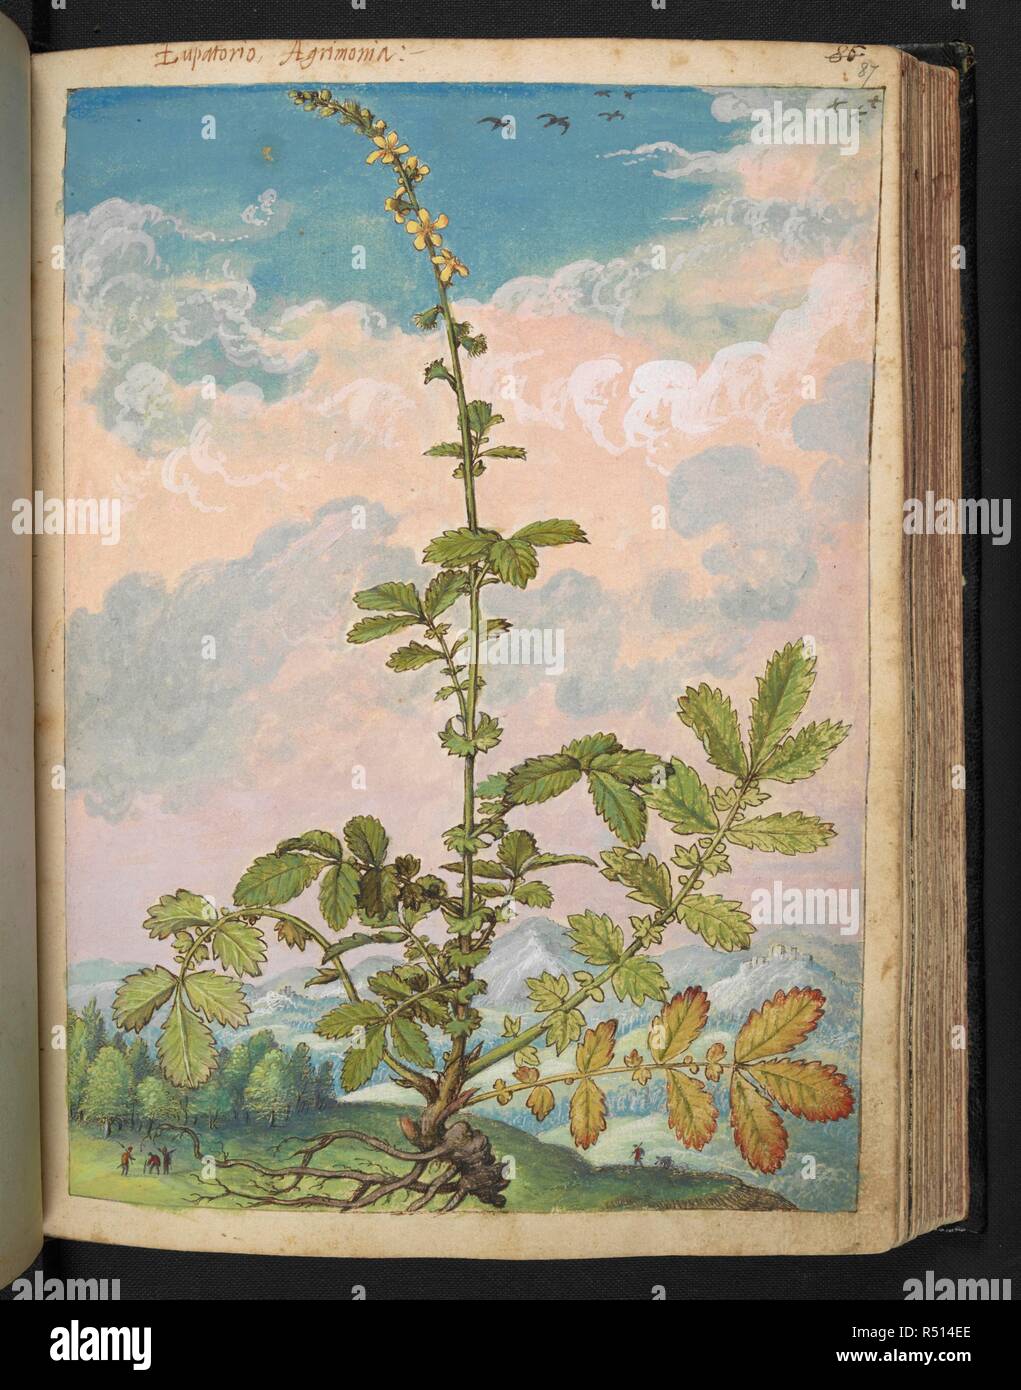 Eupartorio, Agrimonia.'  Agrimonia eupatoria is a species of agrimony that is often referred to as common agrimony, church steeples or sticklewort. Coloured drawings of plants, copied from nature in the Roman States, by Gerardo Cibo. Vol. I. Pietro Andrea Mattioli, Physician, of Siena: Extracts from his edition of Dioscorides' 'de re Medica':. Italy, c. 1564-1584. Source: Add. 22332 f.87. Language: Italian. Author: Cibo, Gheraldo. Stock Photo